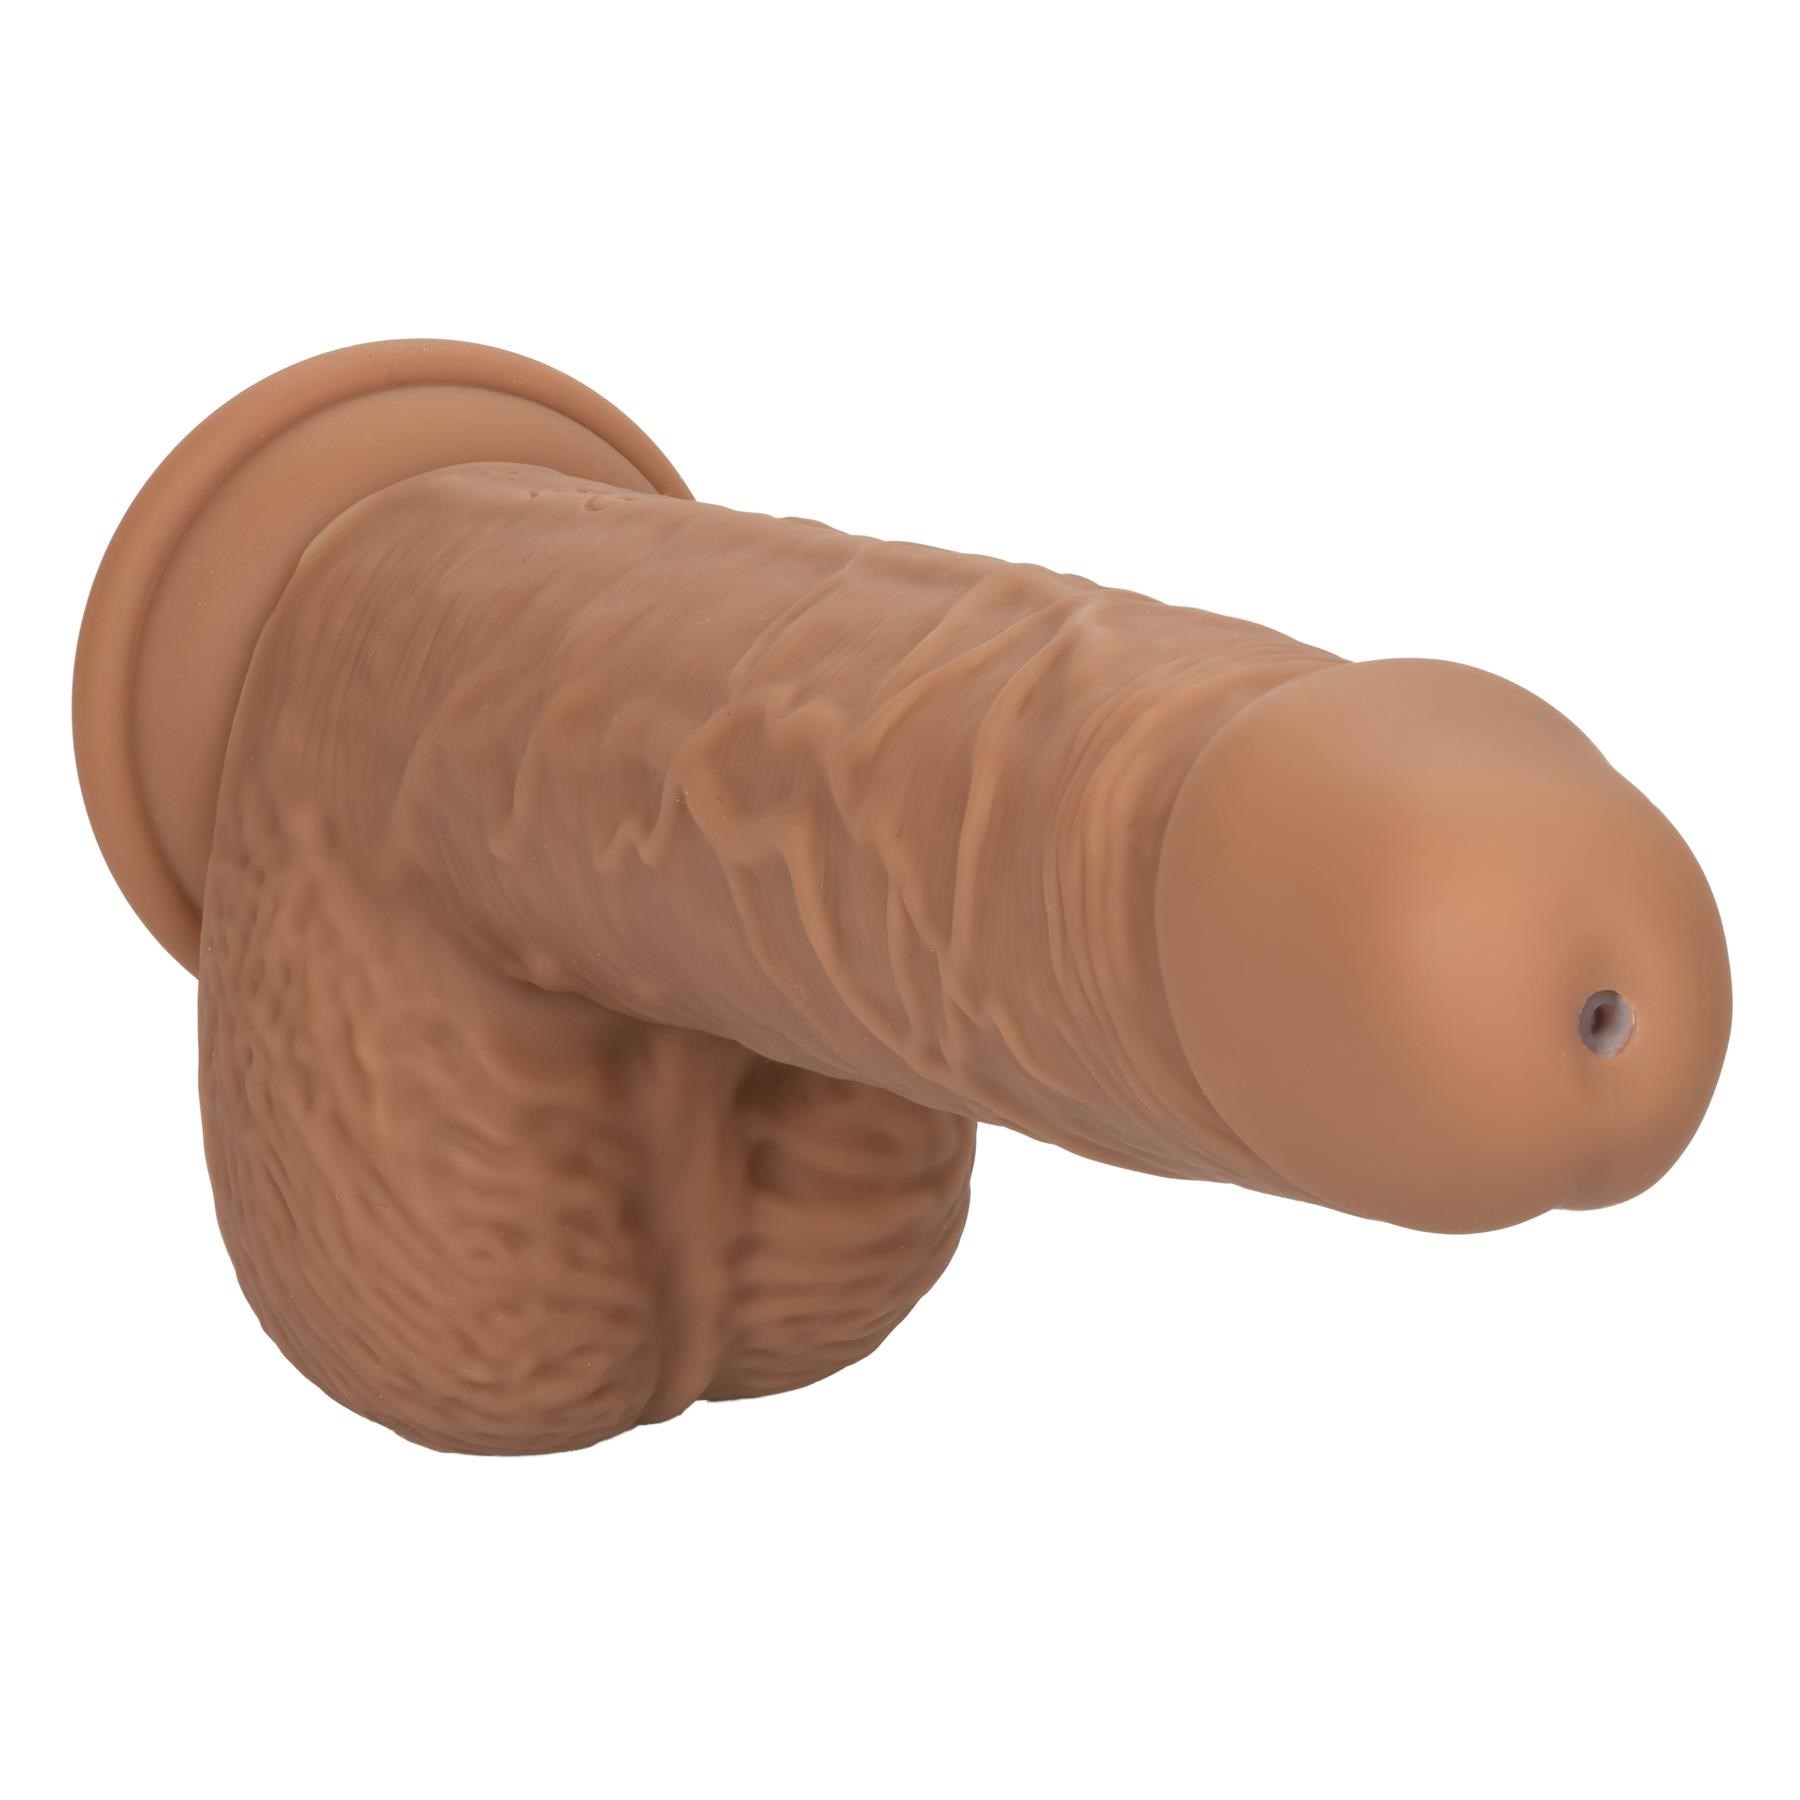 F*ck Stick Squirting and Vibrating Dildo- Product Shot #4- Brown